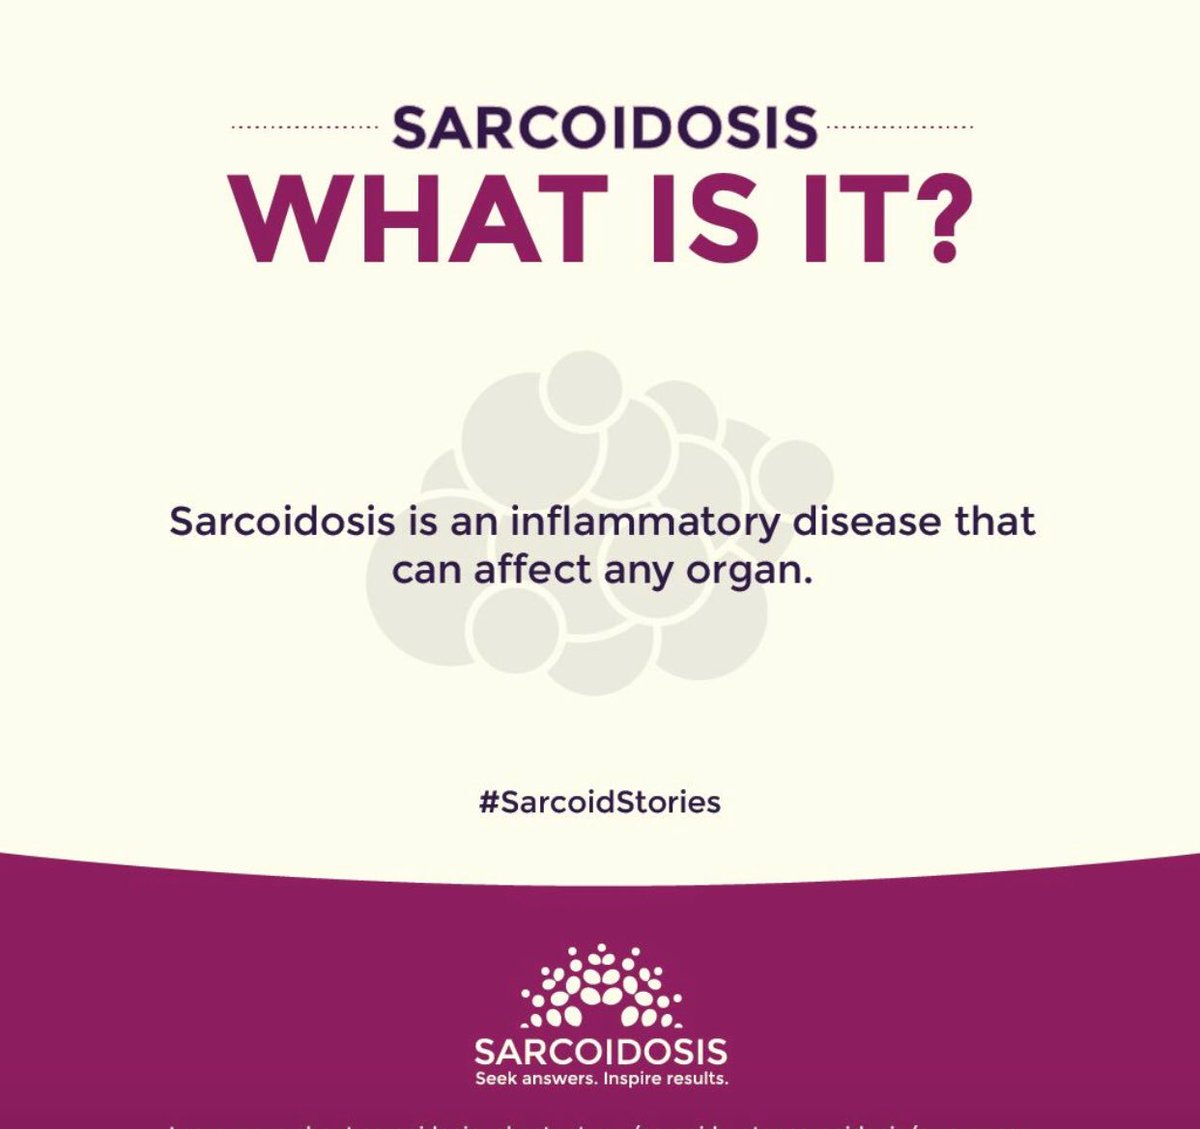 #Sarcoidosis is an inflammatory disease of unknown origin that can affect almost any organ in the body. It occurs when a person’s immune system overreacts resulting in the formation of granulomas, microscopic clumps of inflammatory cells.
#SarcoidStories